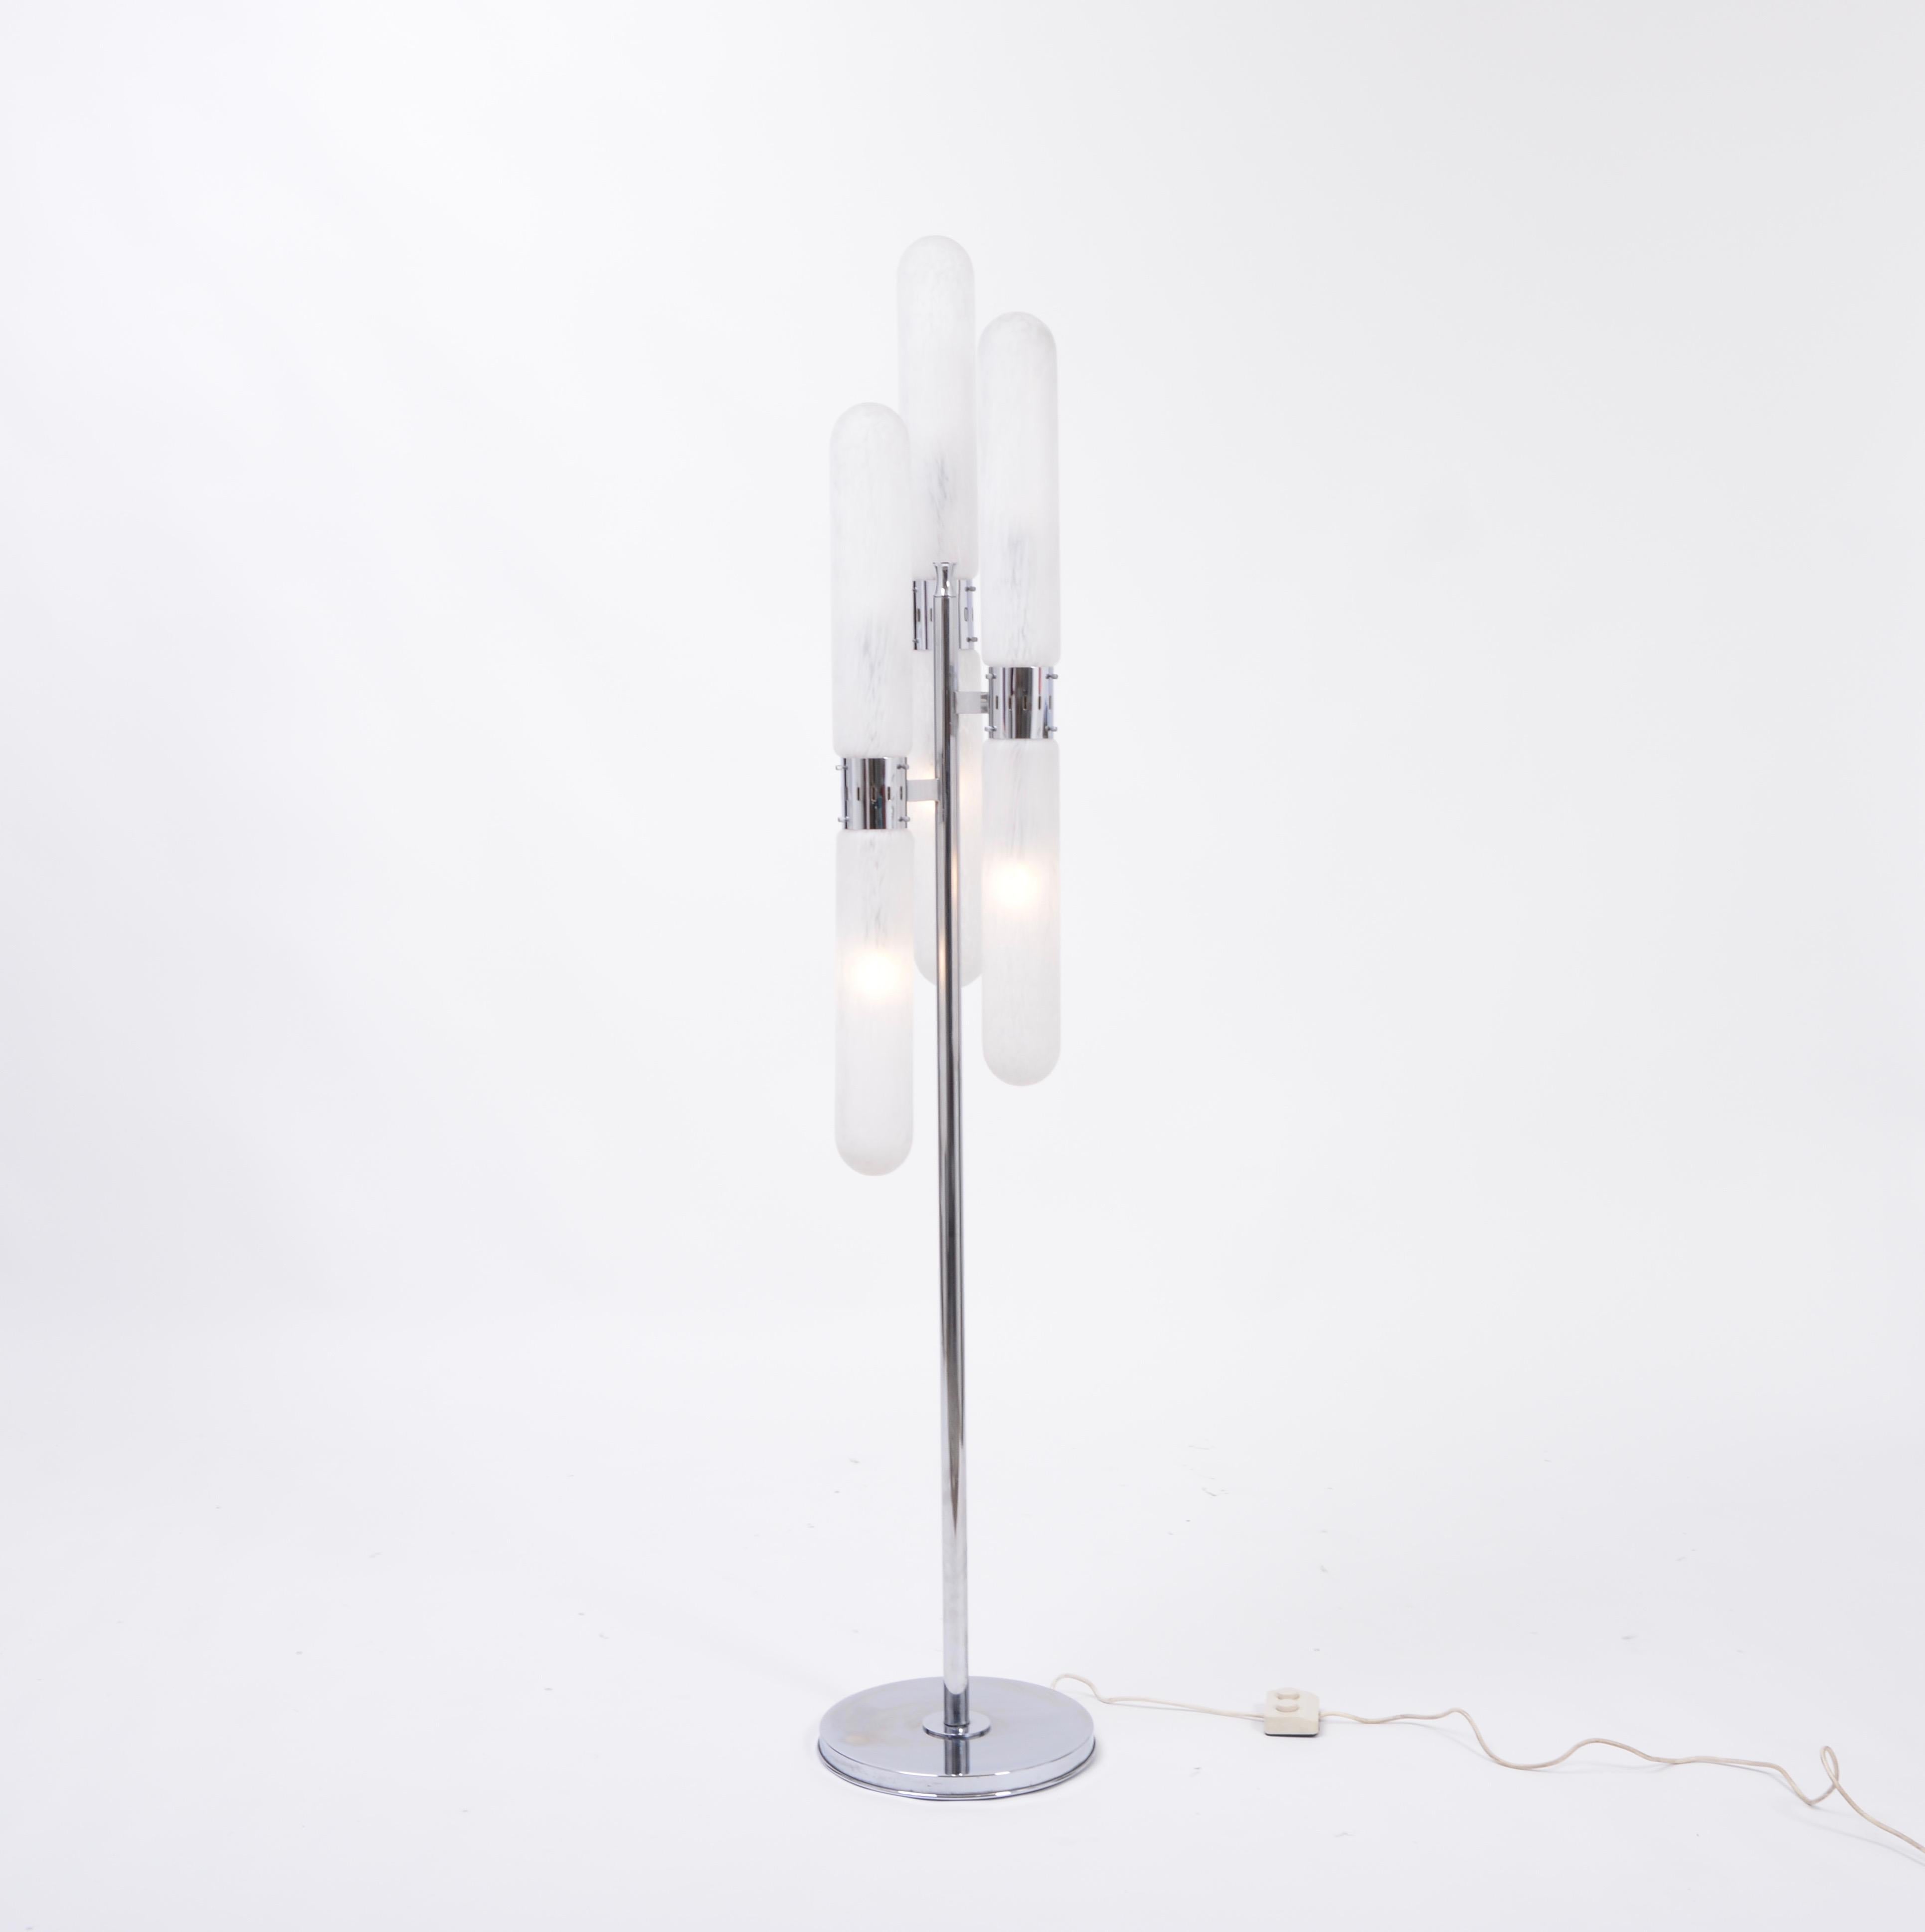 Sculptural vintage Italian floor lamp designed by Aldo Nason and produced by Mazzega during 1960s. The lamp has 6 lights divided into three cylinders separated by a polished steel collar. The lamp has a switch to only illuminate the top three or the